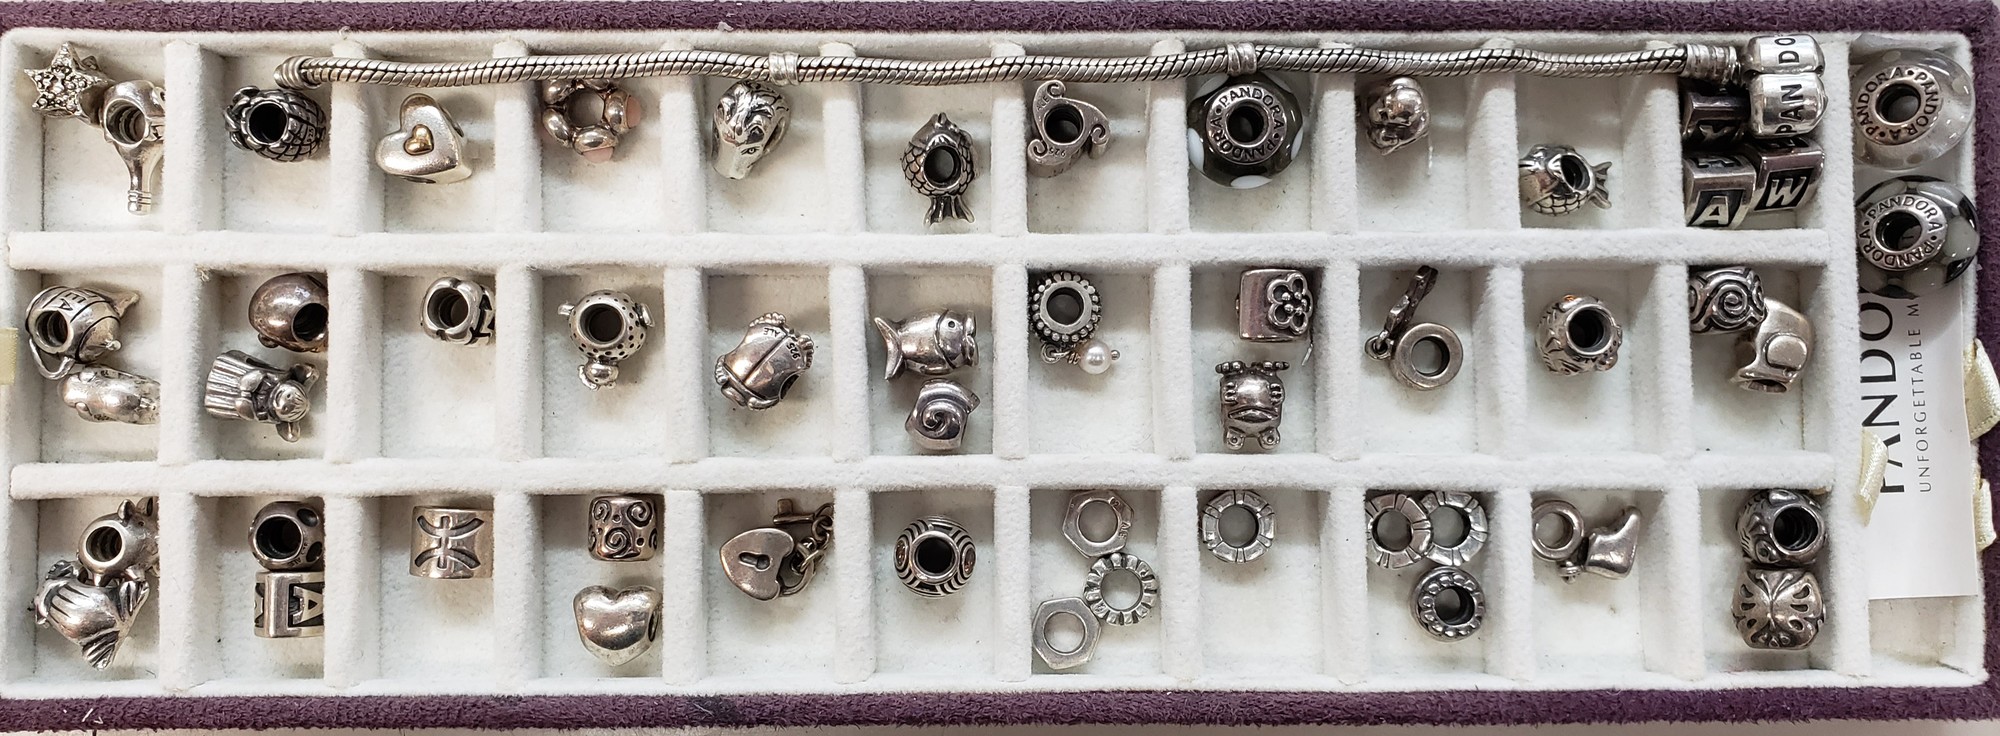 Assorted Pandora Beads

Items are subject to change. Please call for current selections and/or to confirm choices before purchasing.